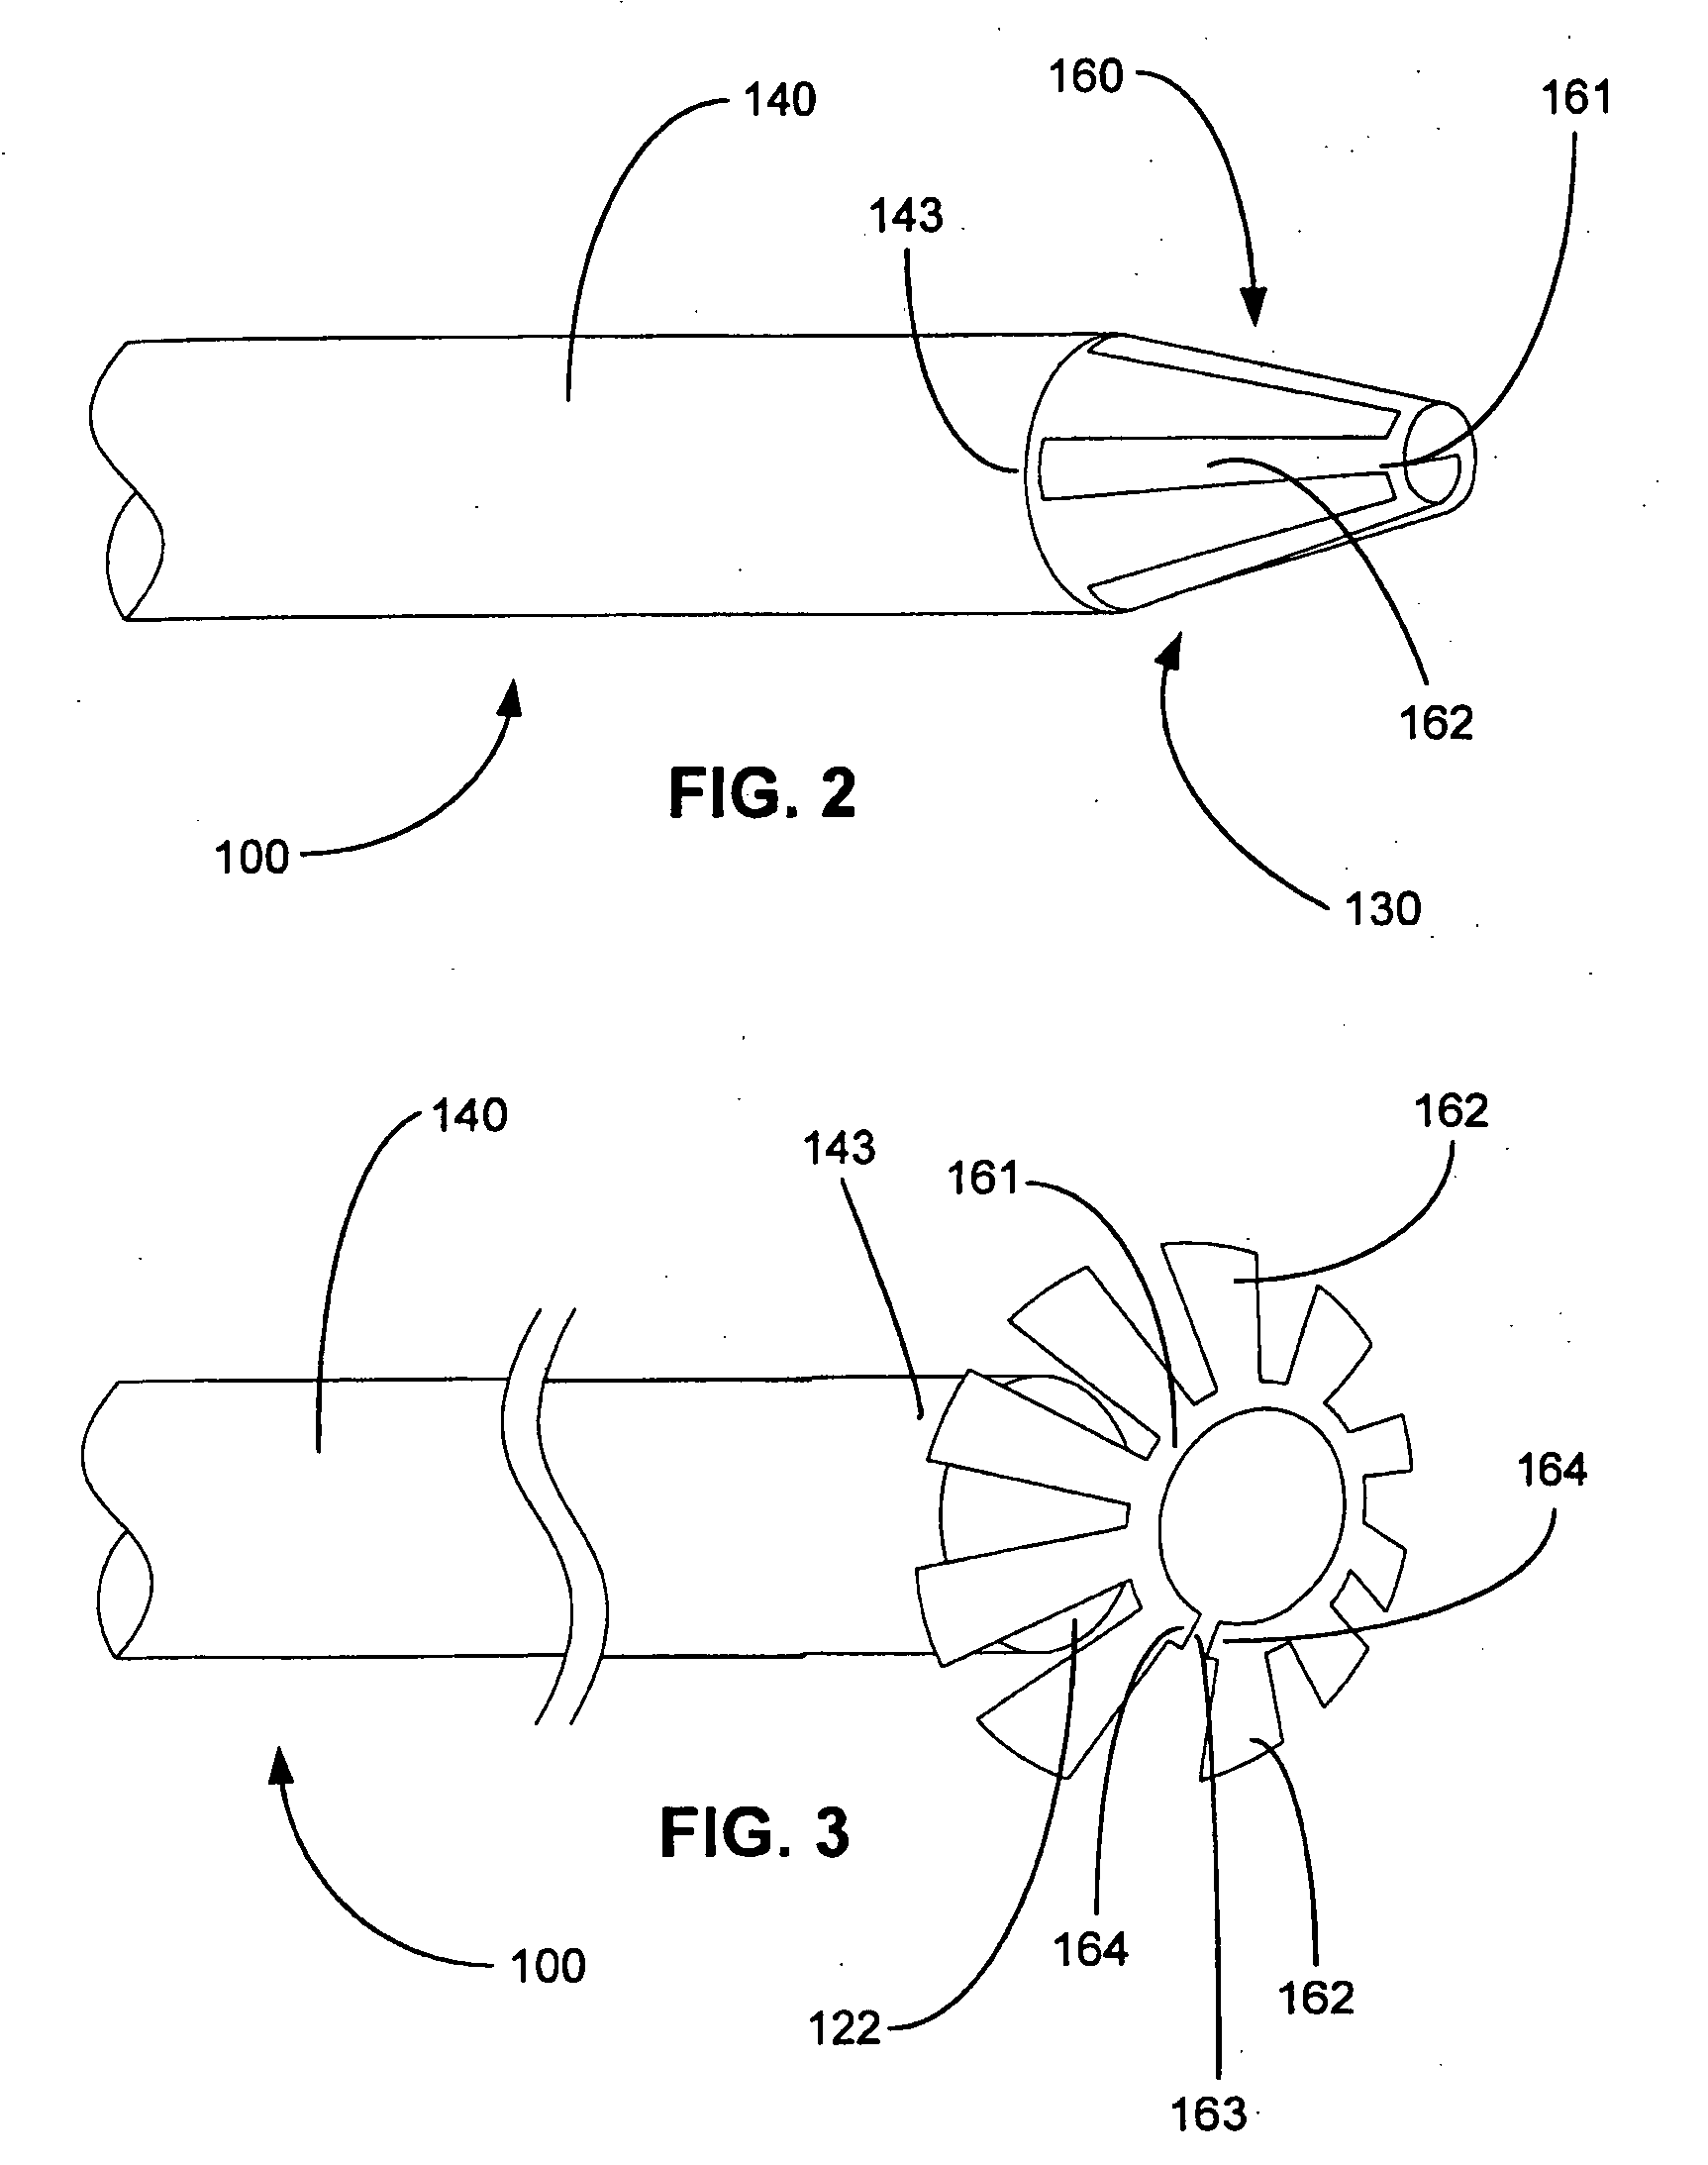 Tissue aperture securing and sealing apparatuses and related methods of use